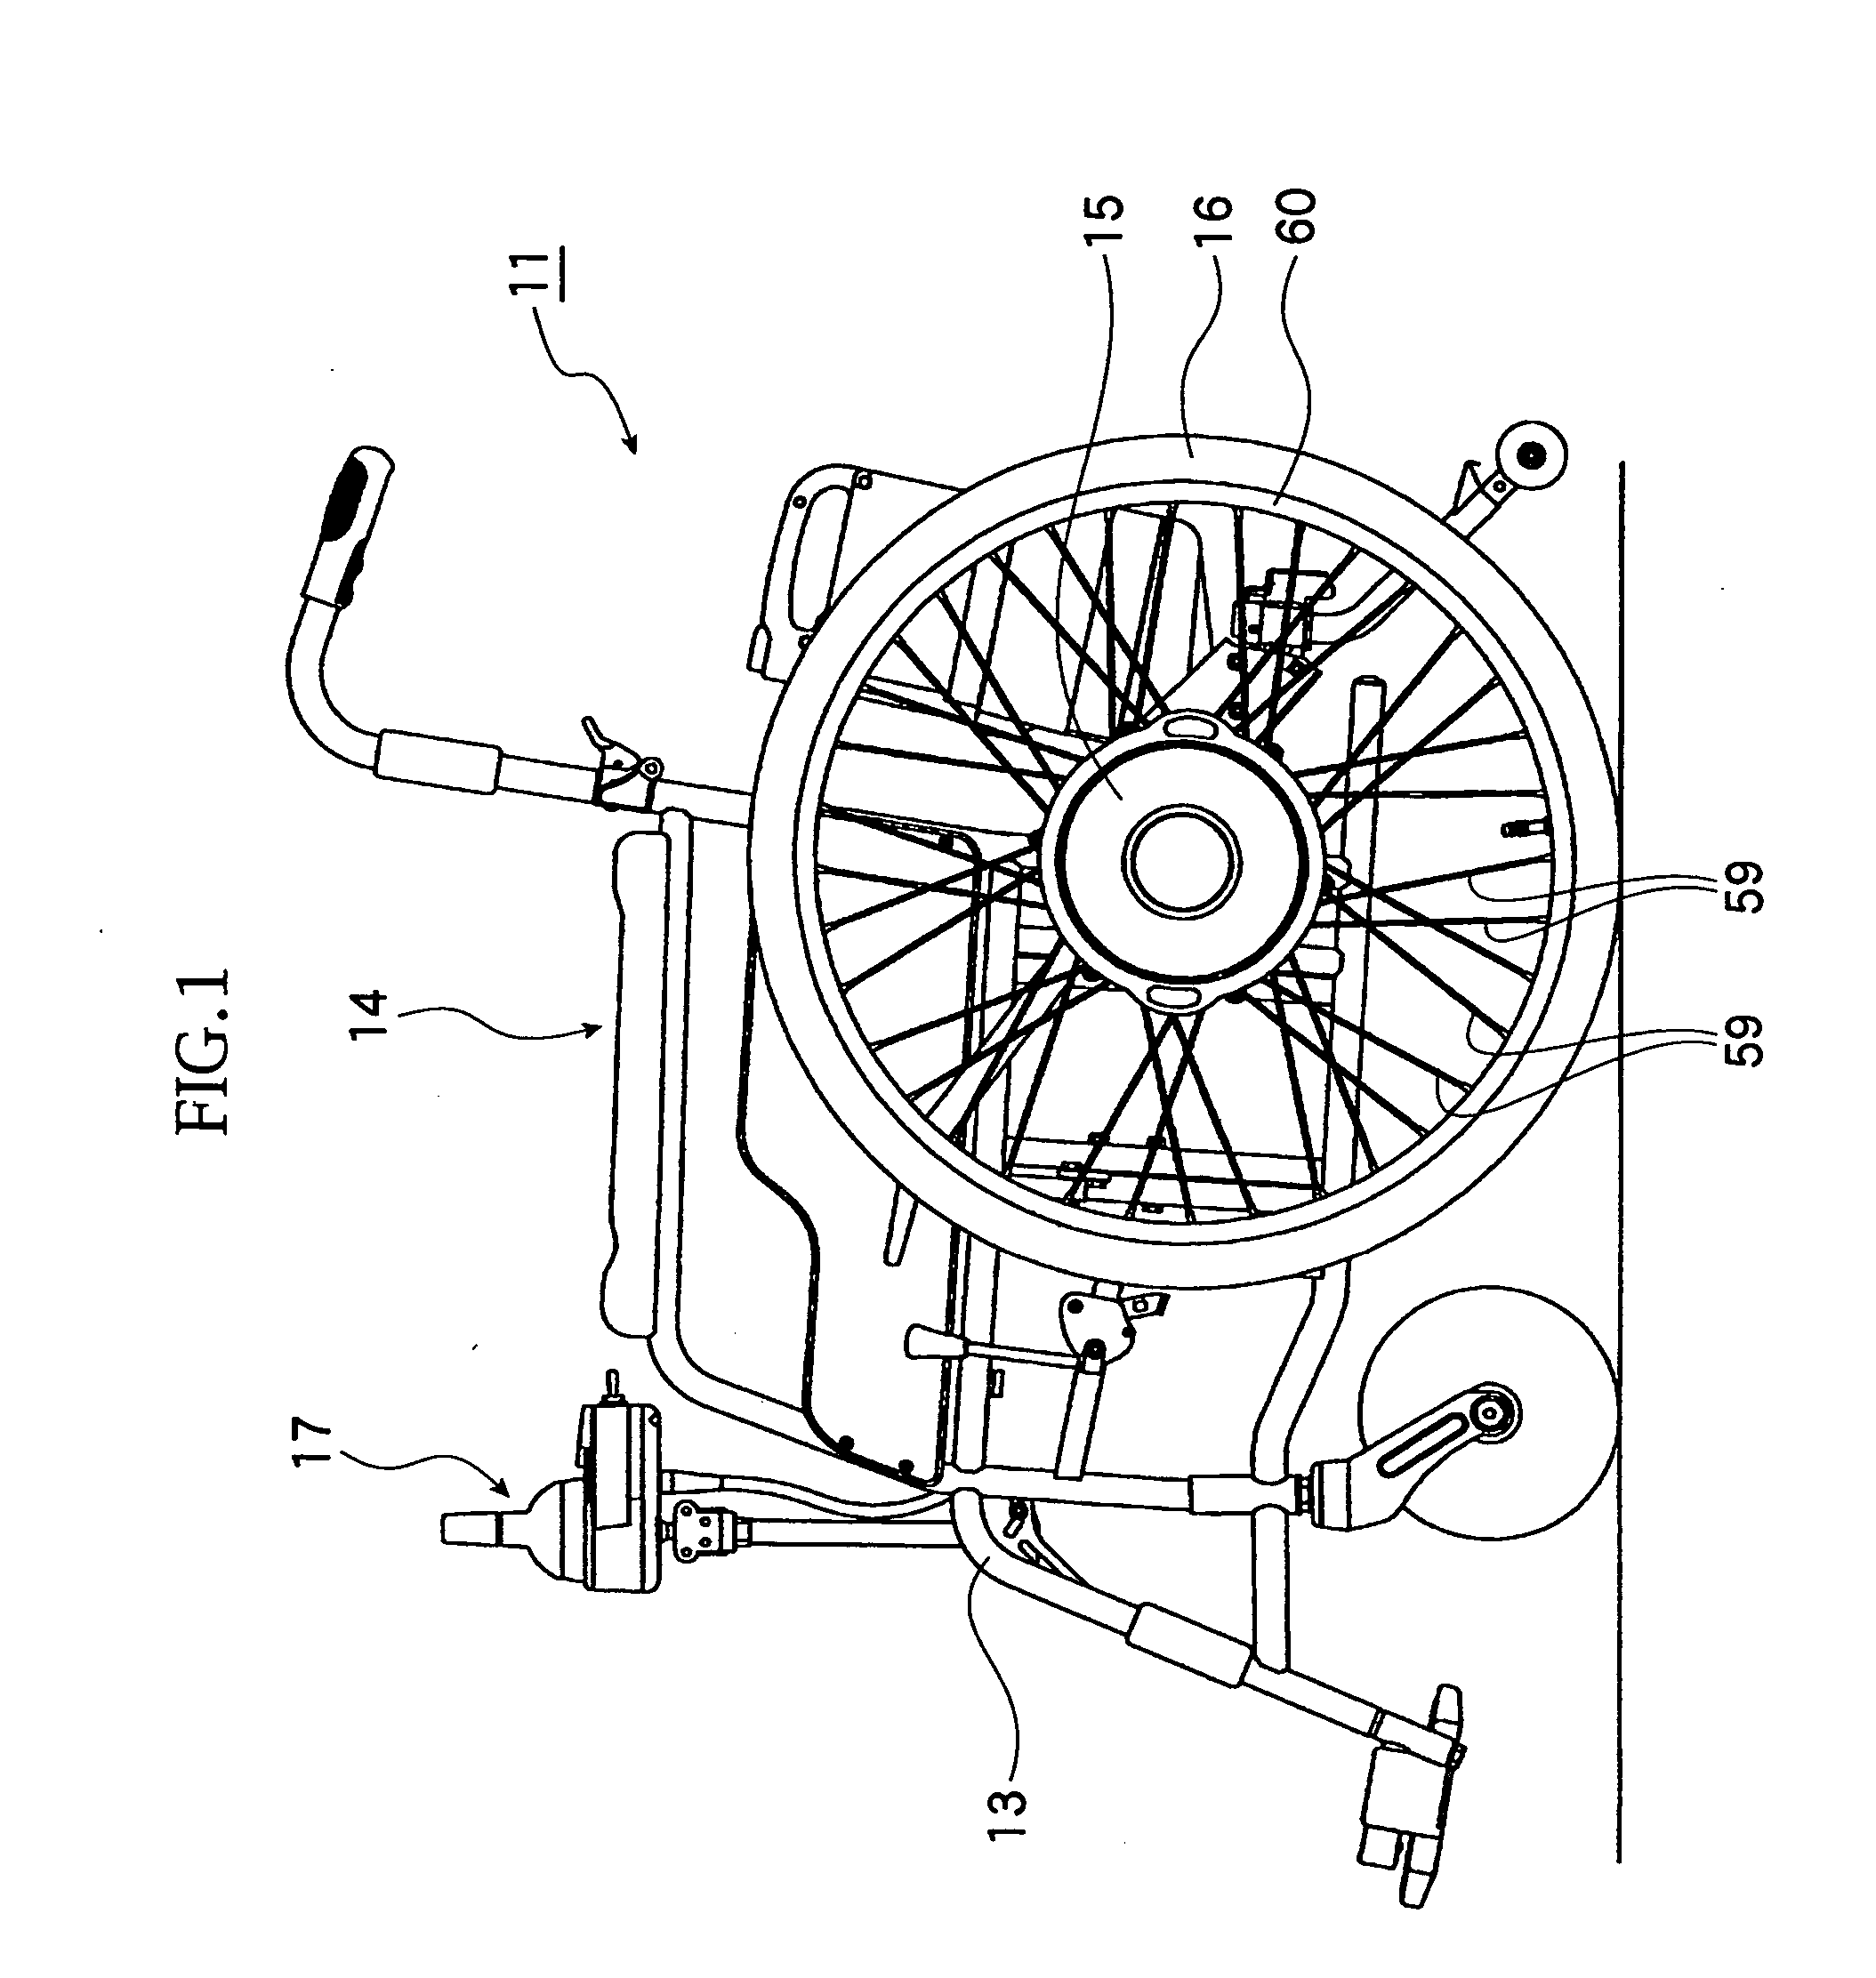 Rotary electric machine and electric wheelchair mounted with rotary electric machine